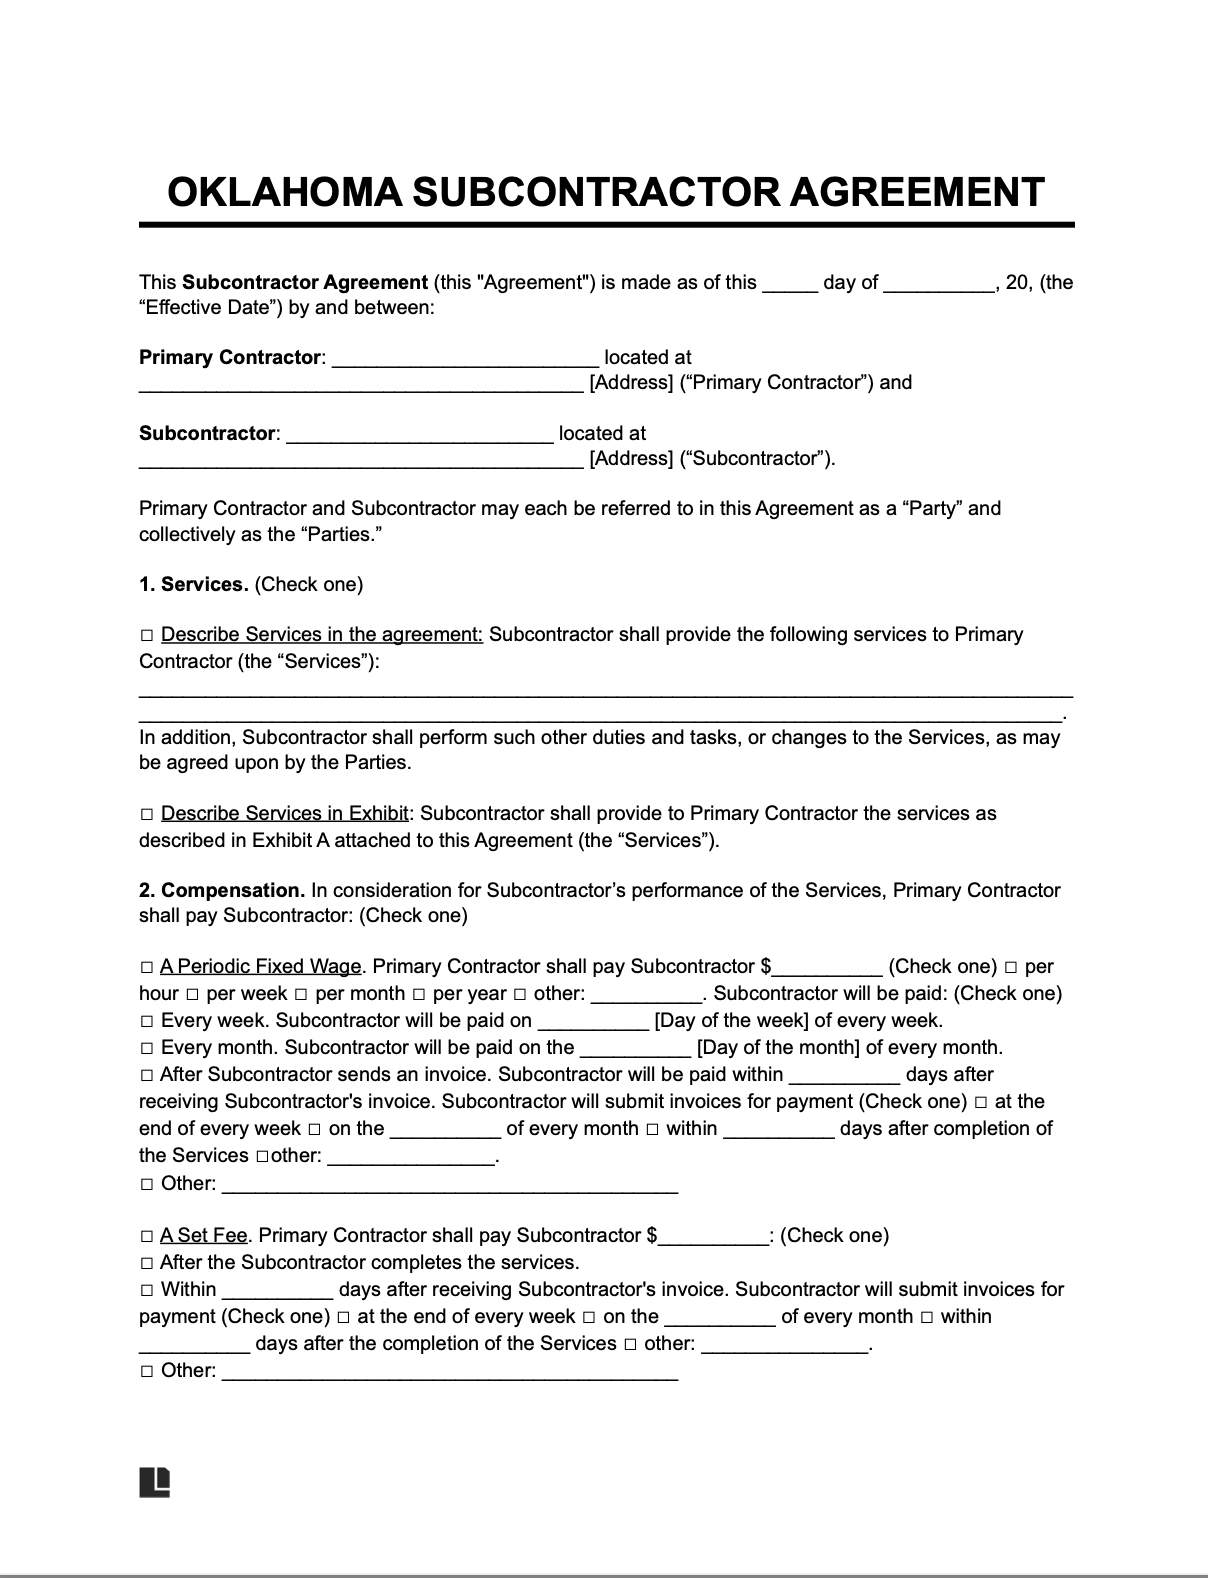 oklahoma subcontractor agreement template